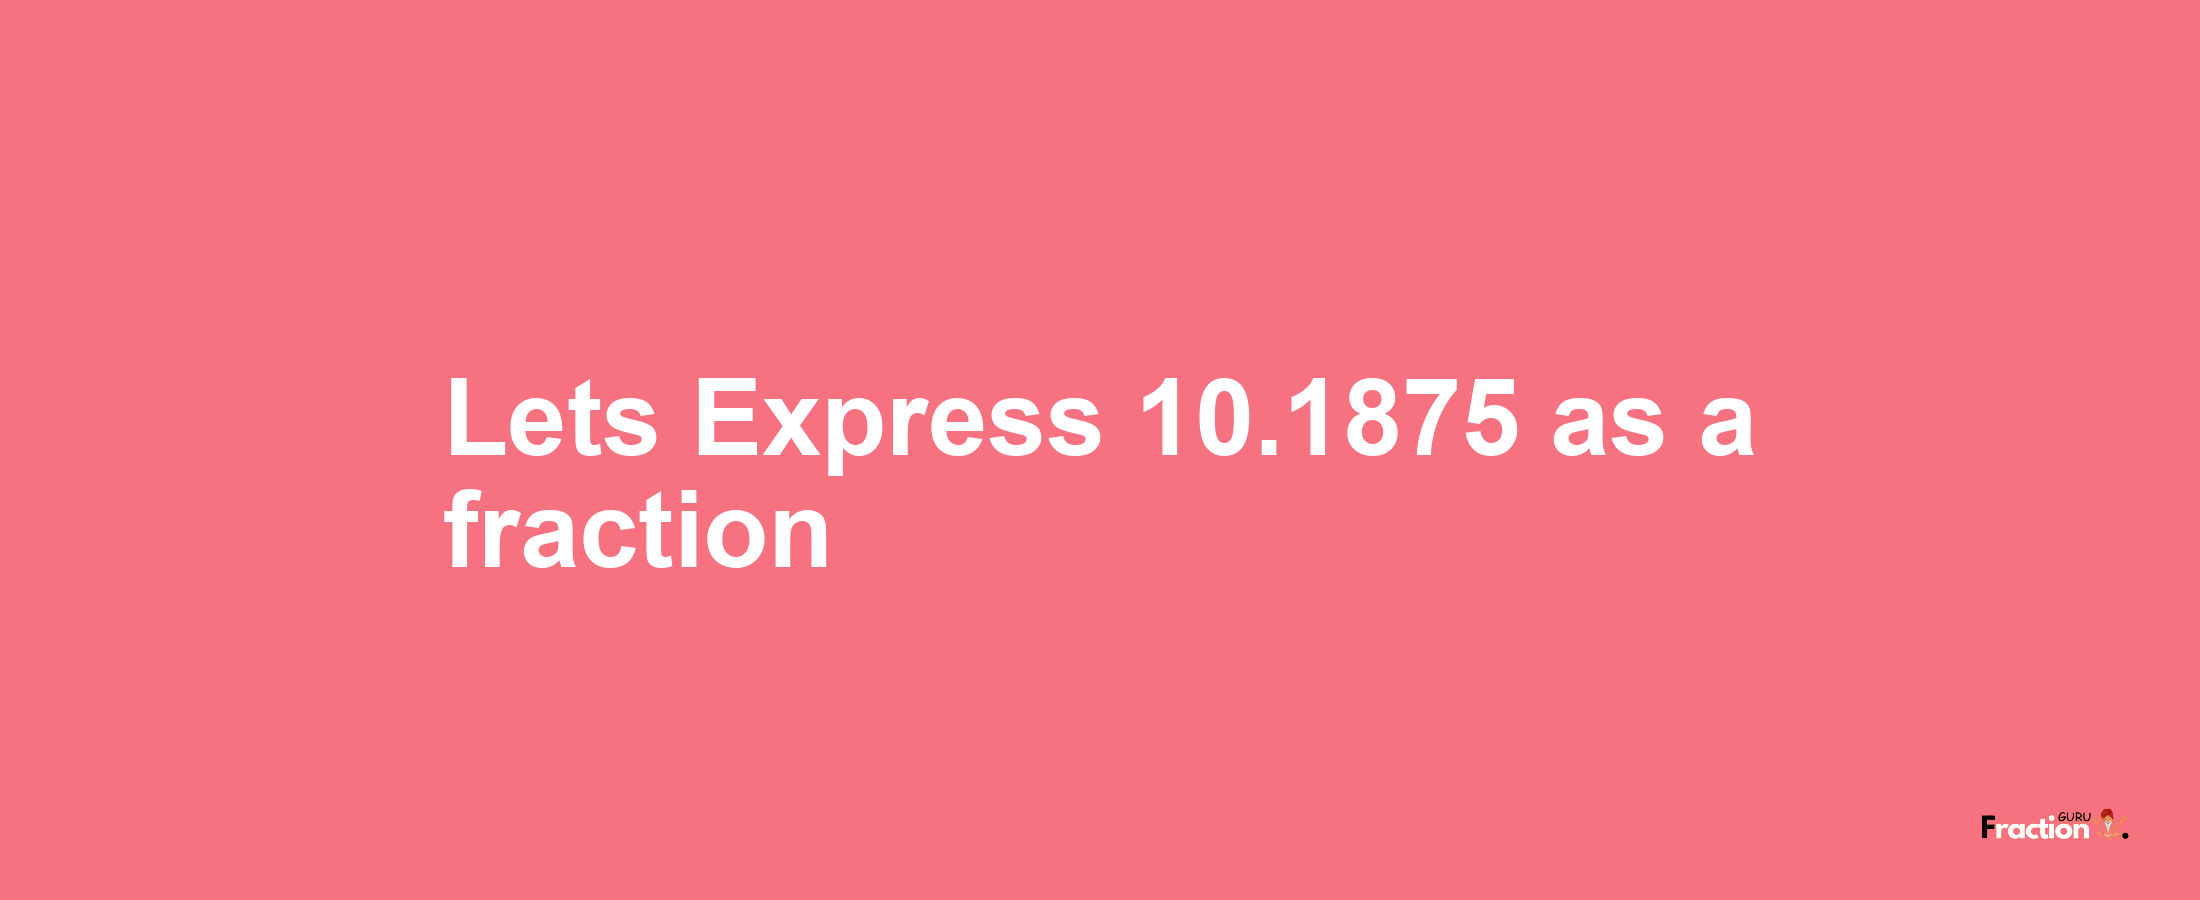 Lets Express 10.1875 as afraction